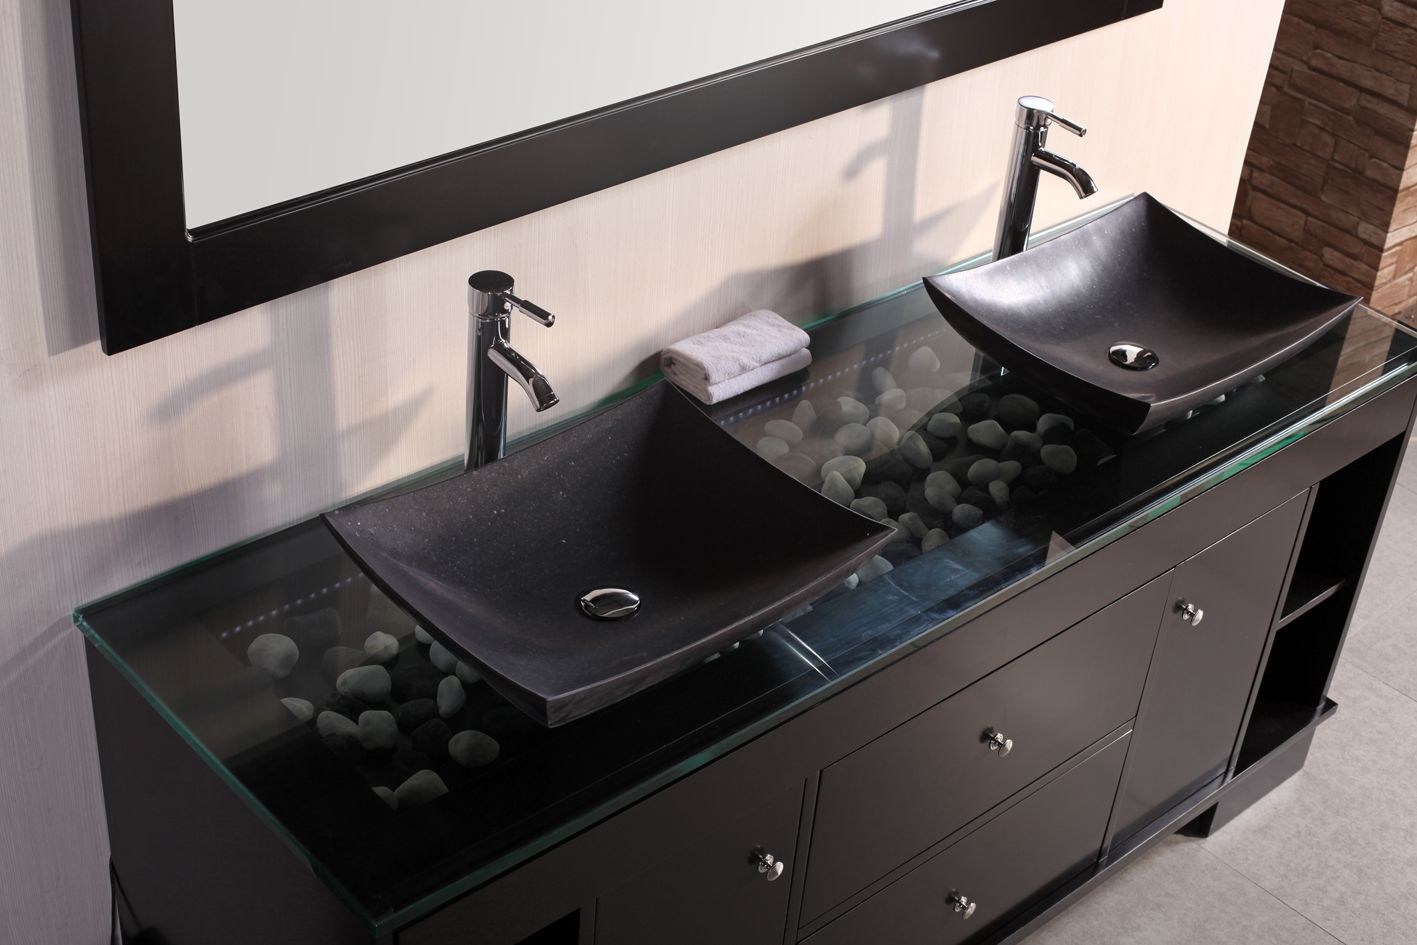 Gothic Double Design Awesome Gothic Double Sink Vanity Design With Glass Countertop Ideas For Your Bathroom Furniture Schemes Bathroom Double Sink Vanity Application For Spacious Bathroom Design